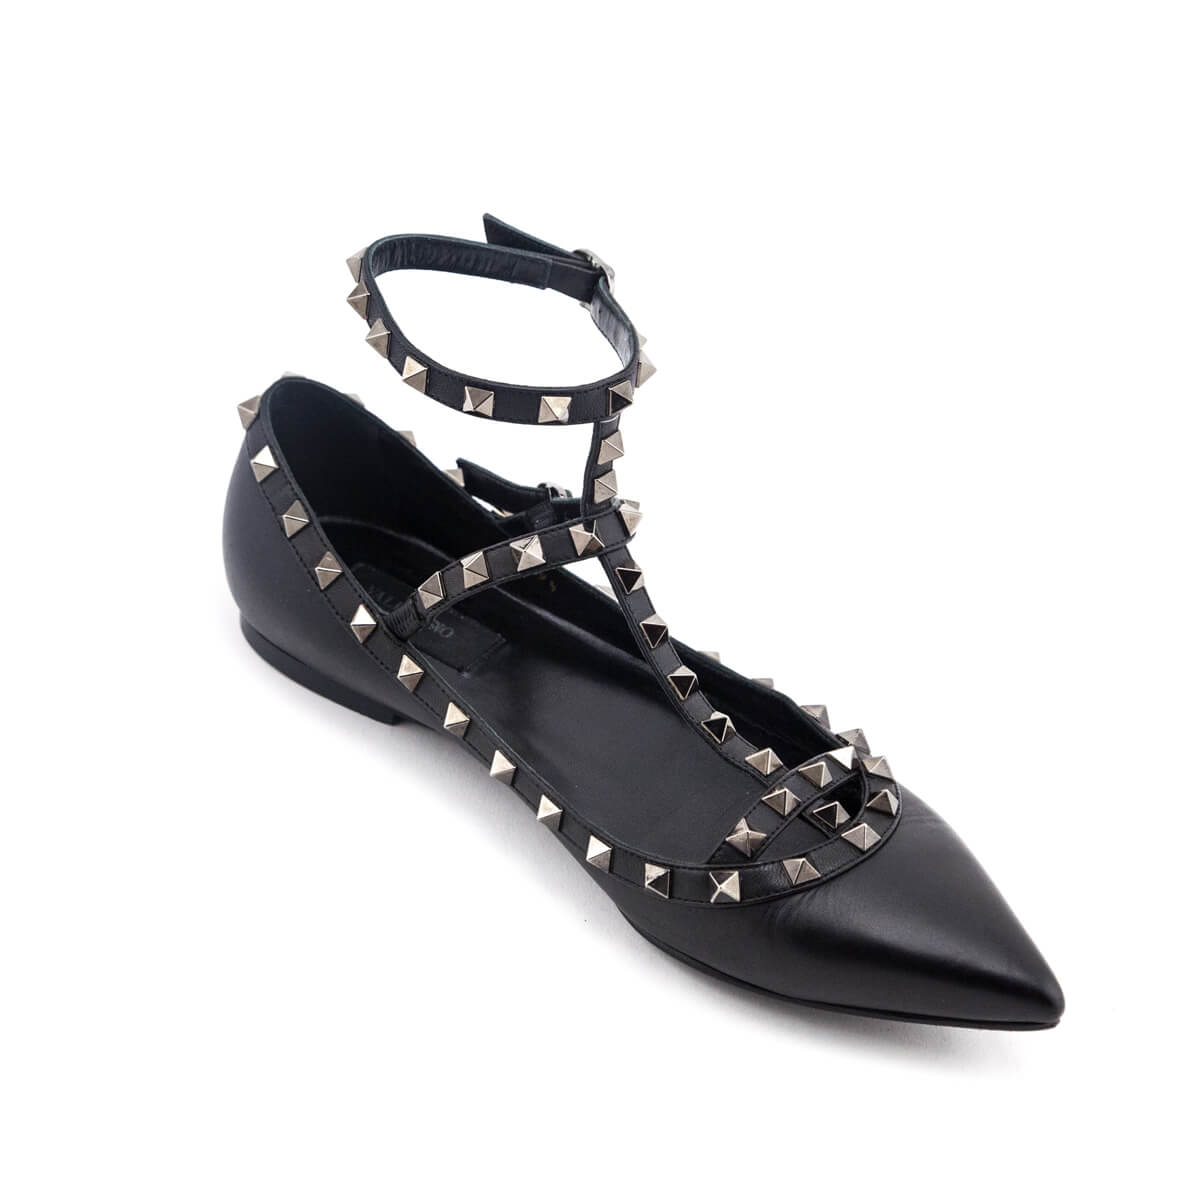 Valentino Black Ankle Strap Flats - Shoes